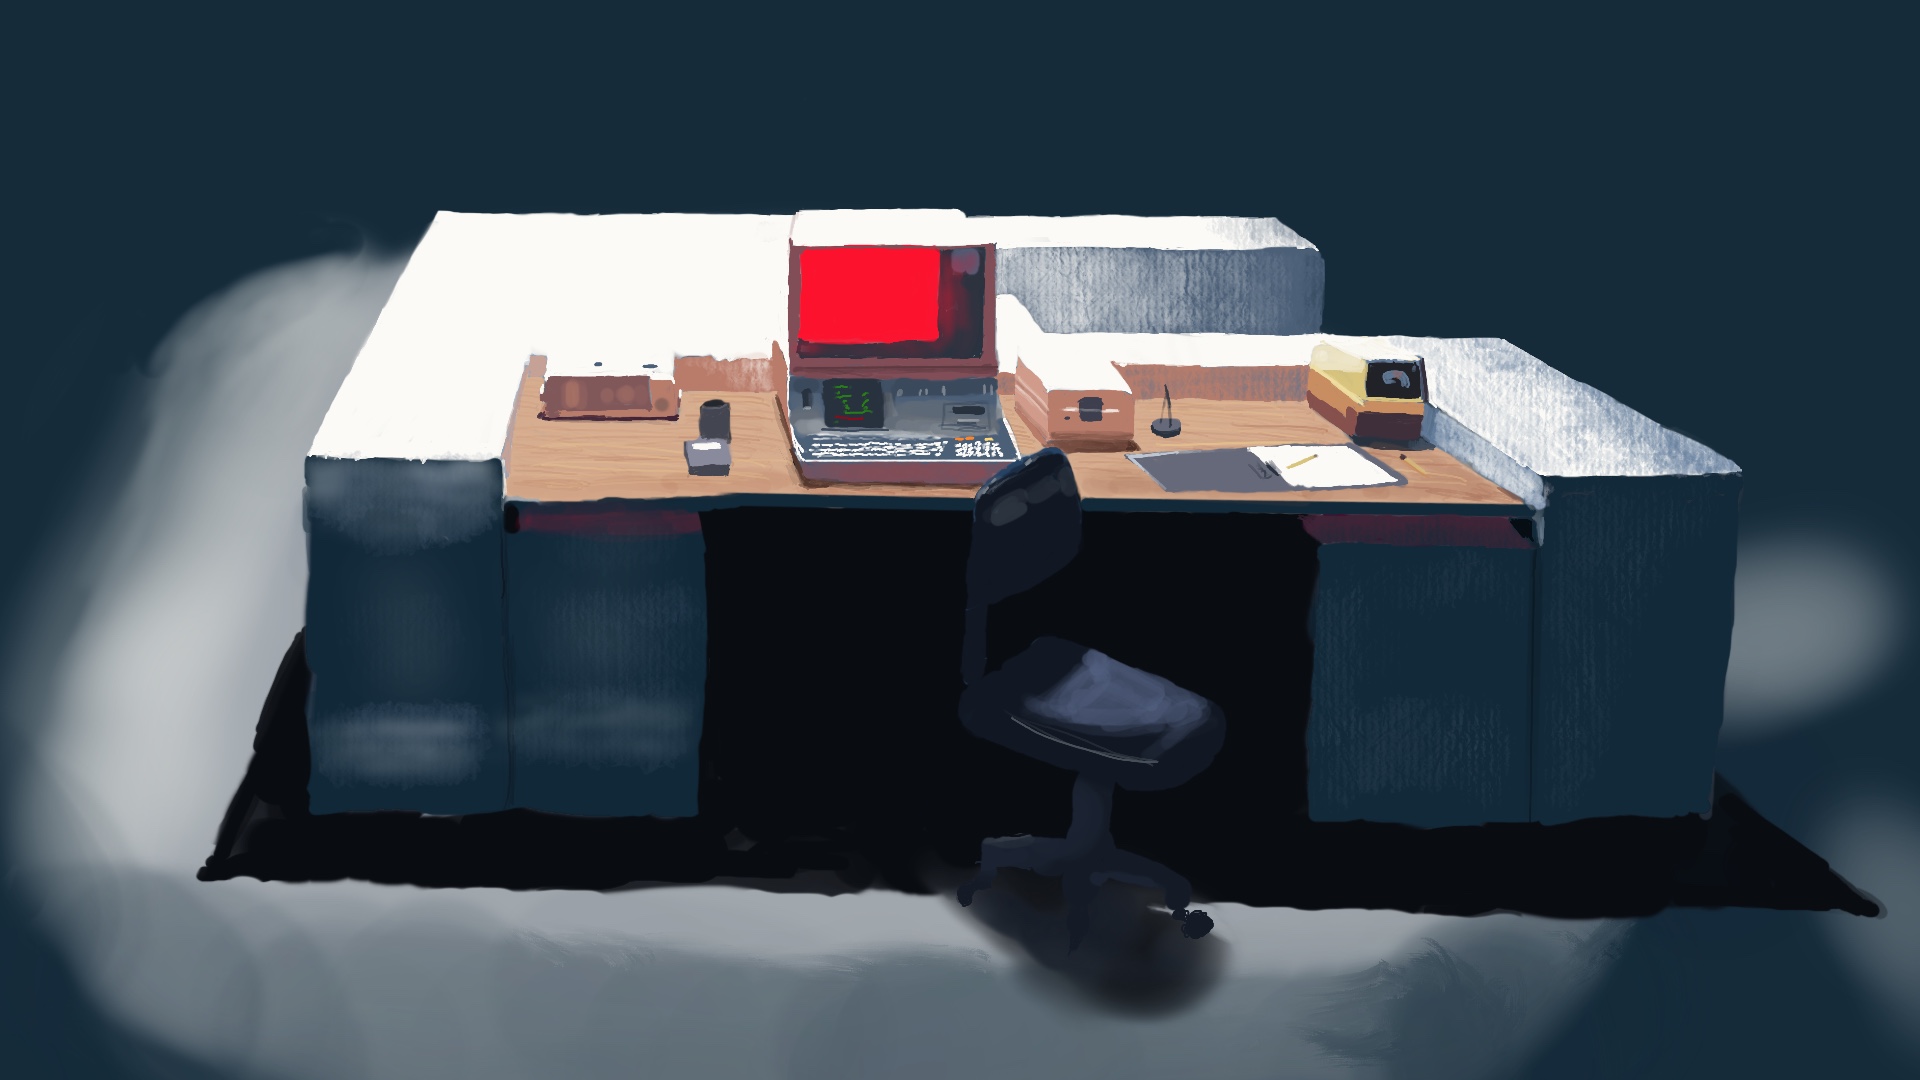 A blocky desk with harsh light from straight above. Most of the desk appears made of concrete, but the work surface is wood. A 1990-era computer has a screen filled with foreboding red.